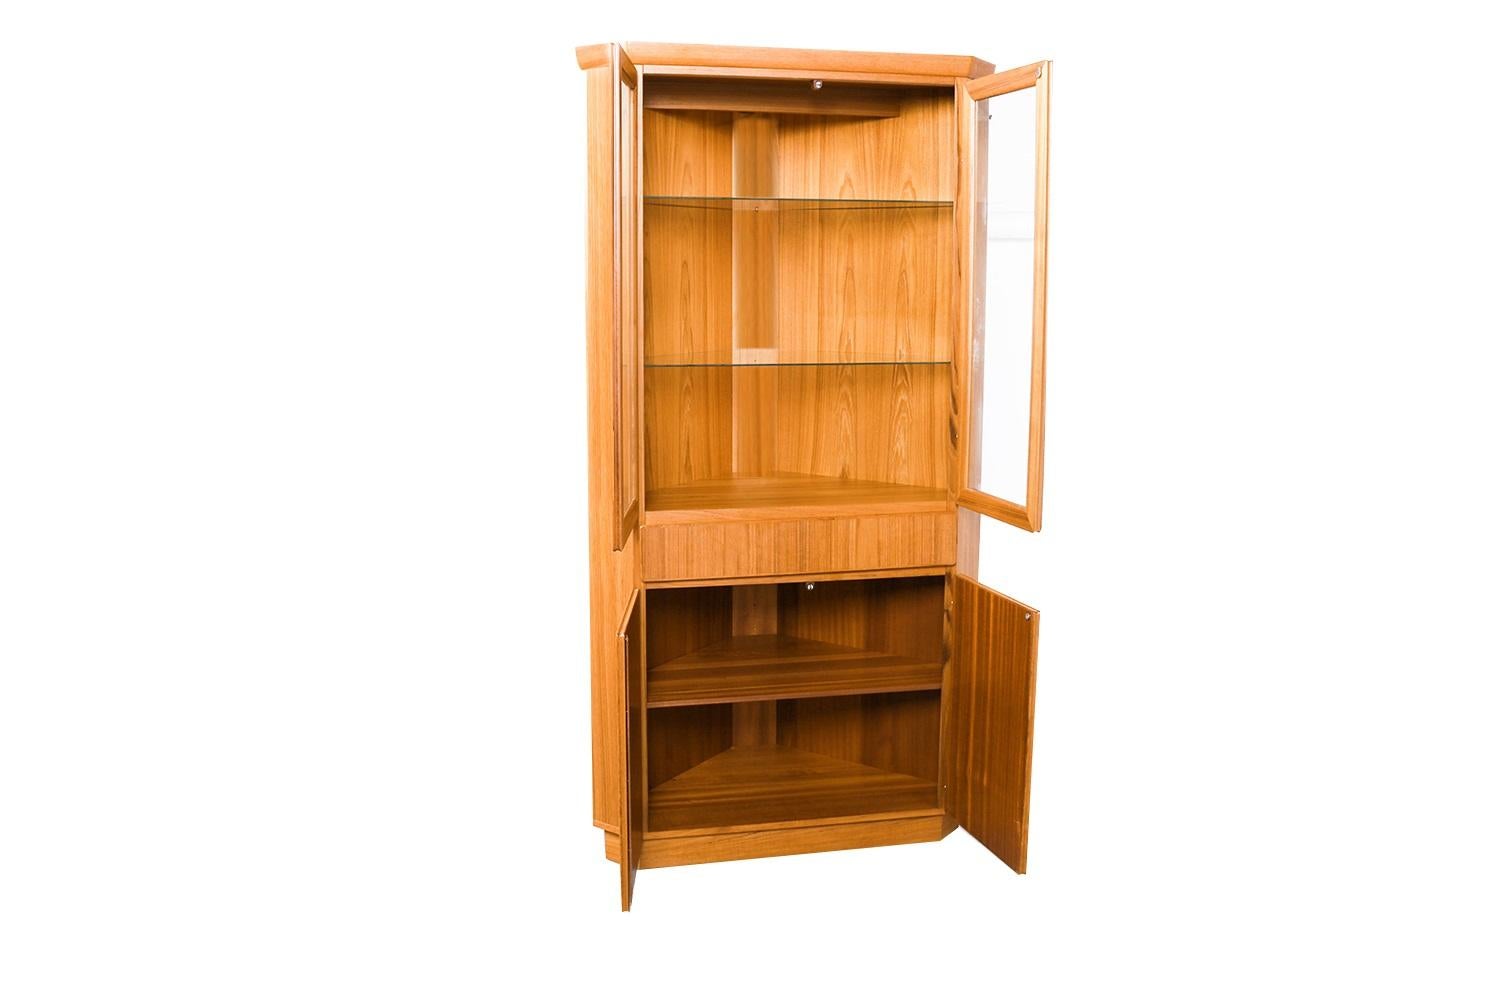 This stunning corner cabinet is a beautiful example of Danish modern furniture by Skovby Mobelfabrik. The lighted one piece cabinet features an upper cabinet with double glass doors that open to reveal a lighted display area at top, with a single